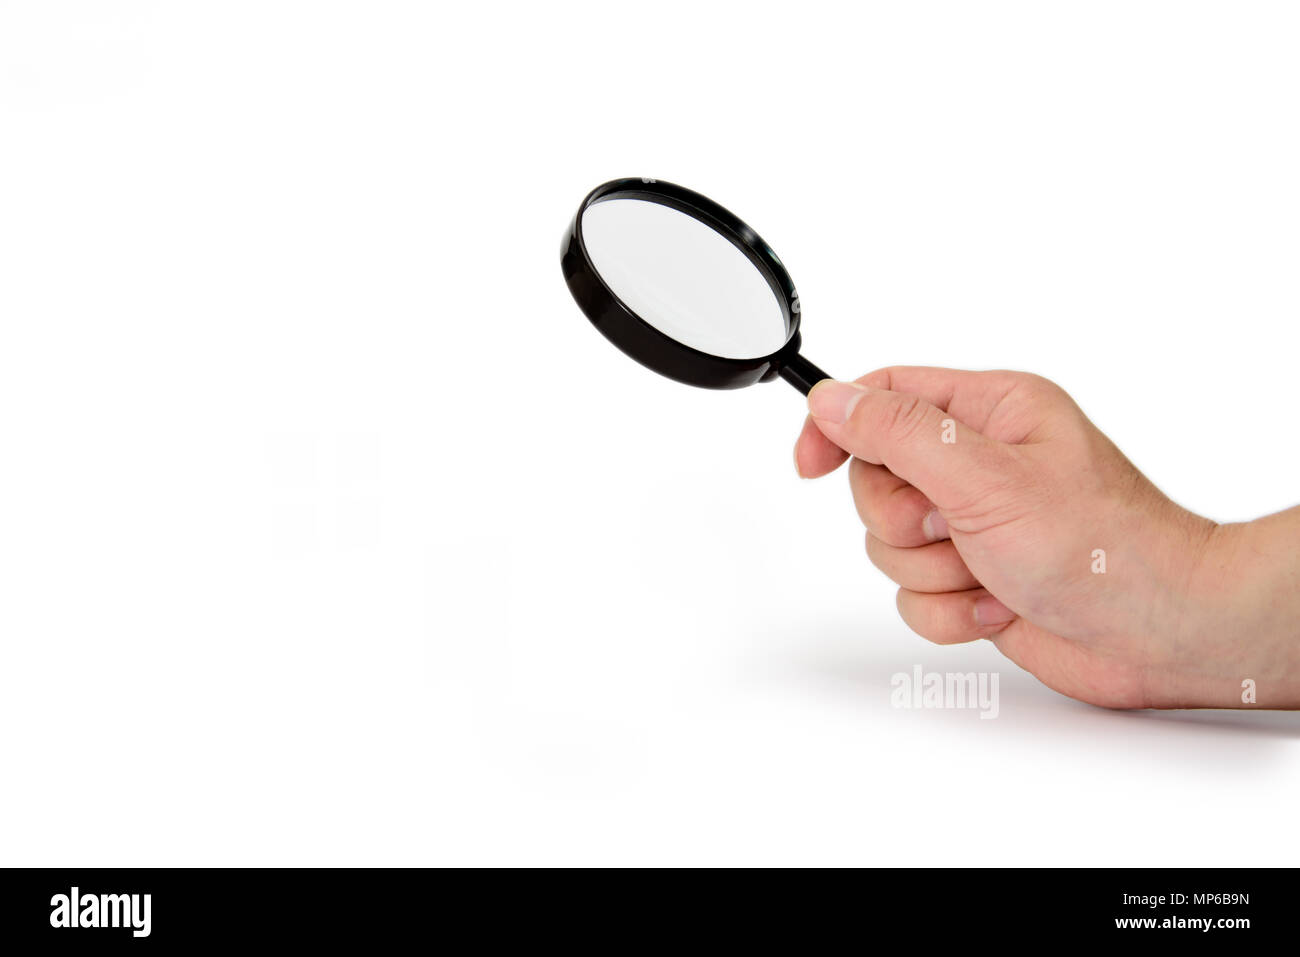 Hand holding magnifying glass isolated on white background Stock Photo